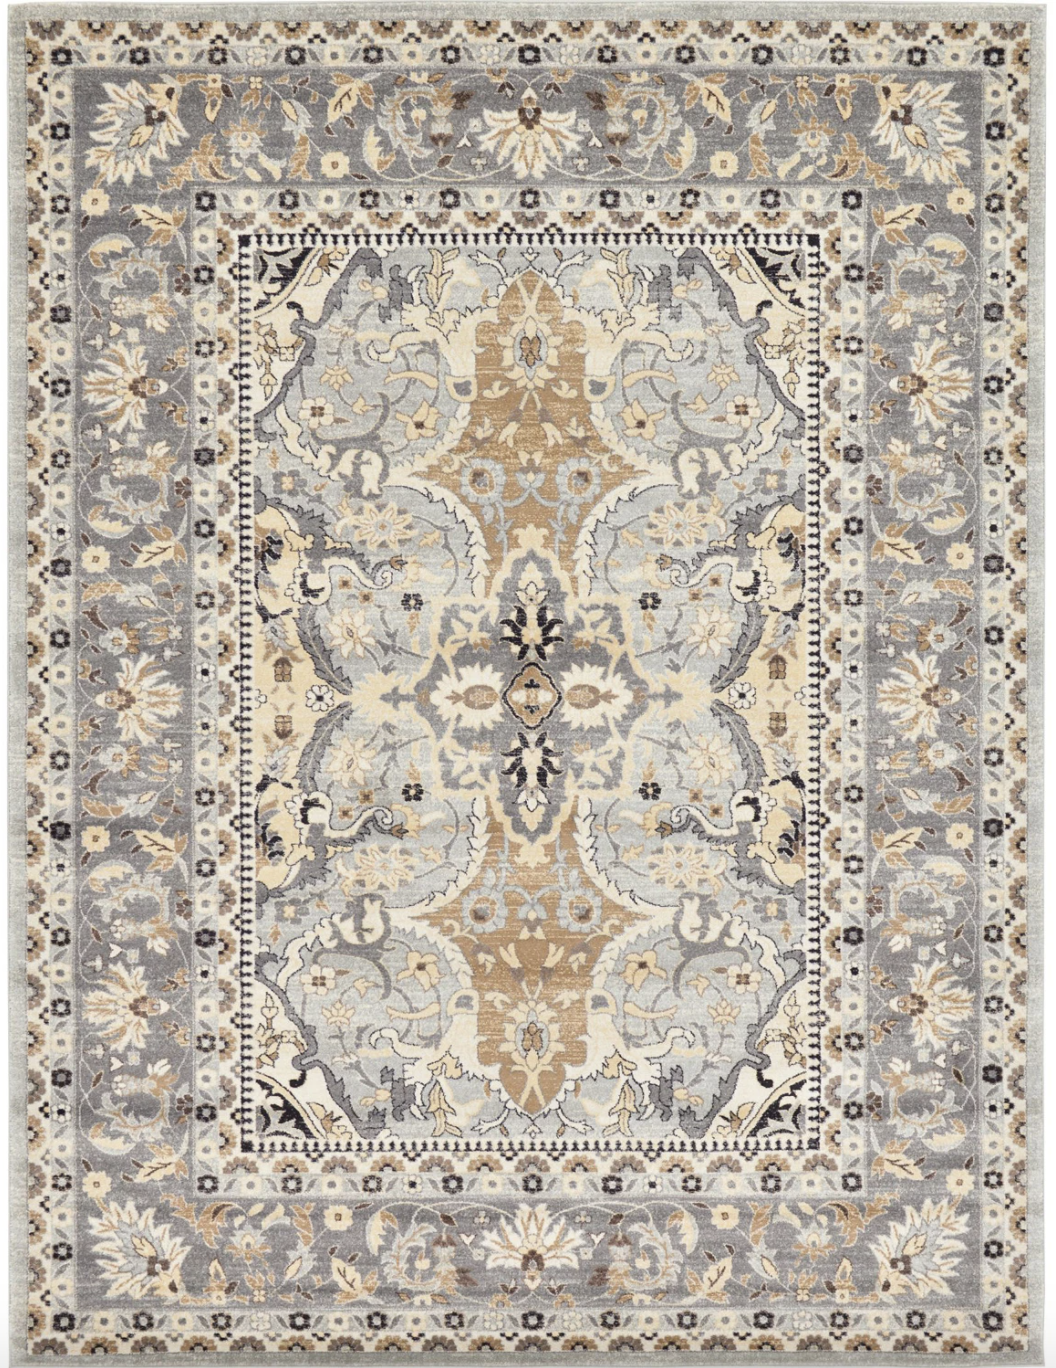 A beige and grey Persian rug is shown